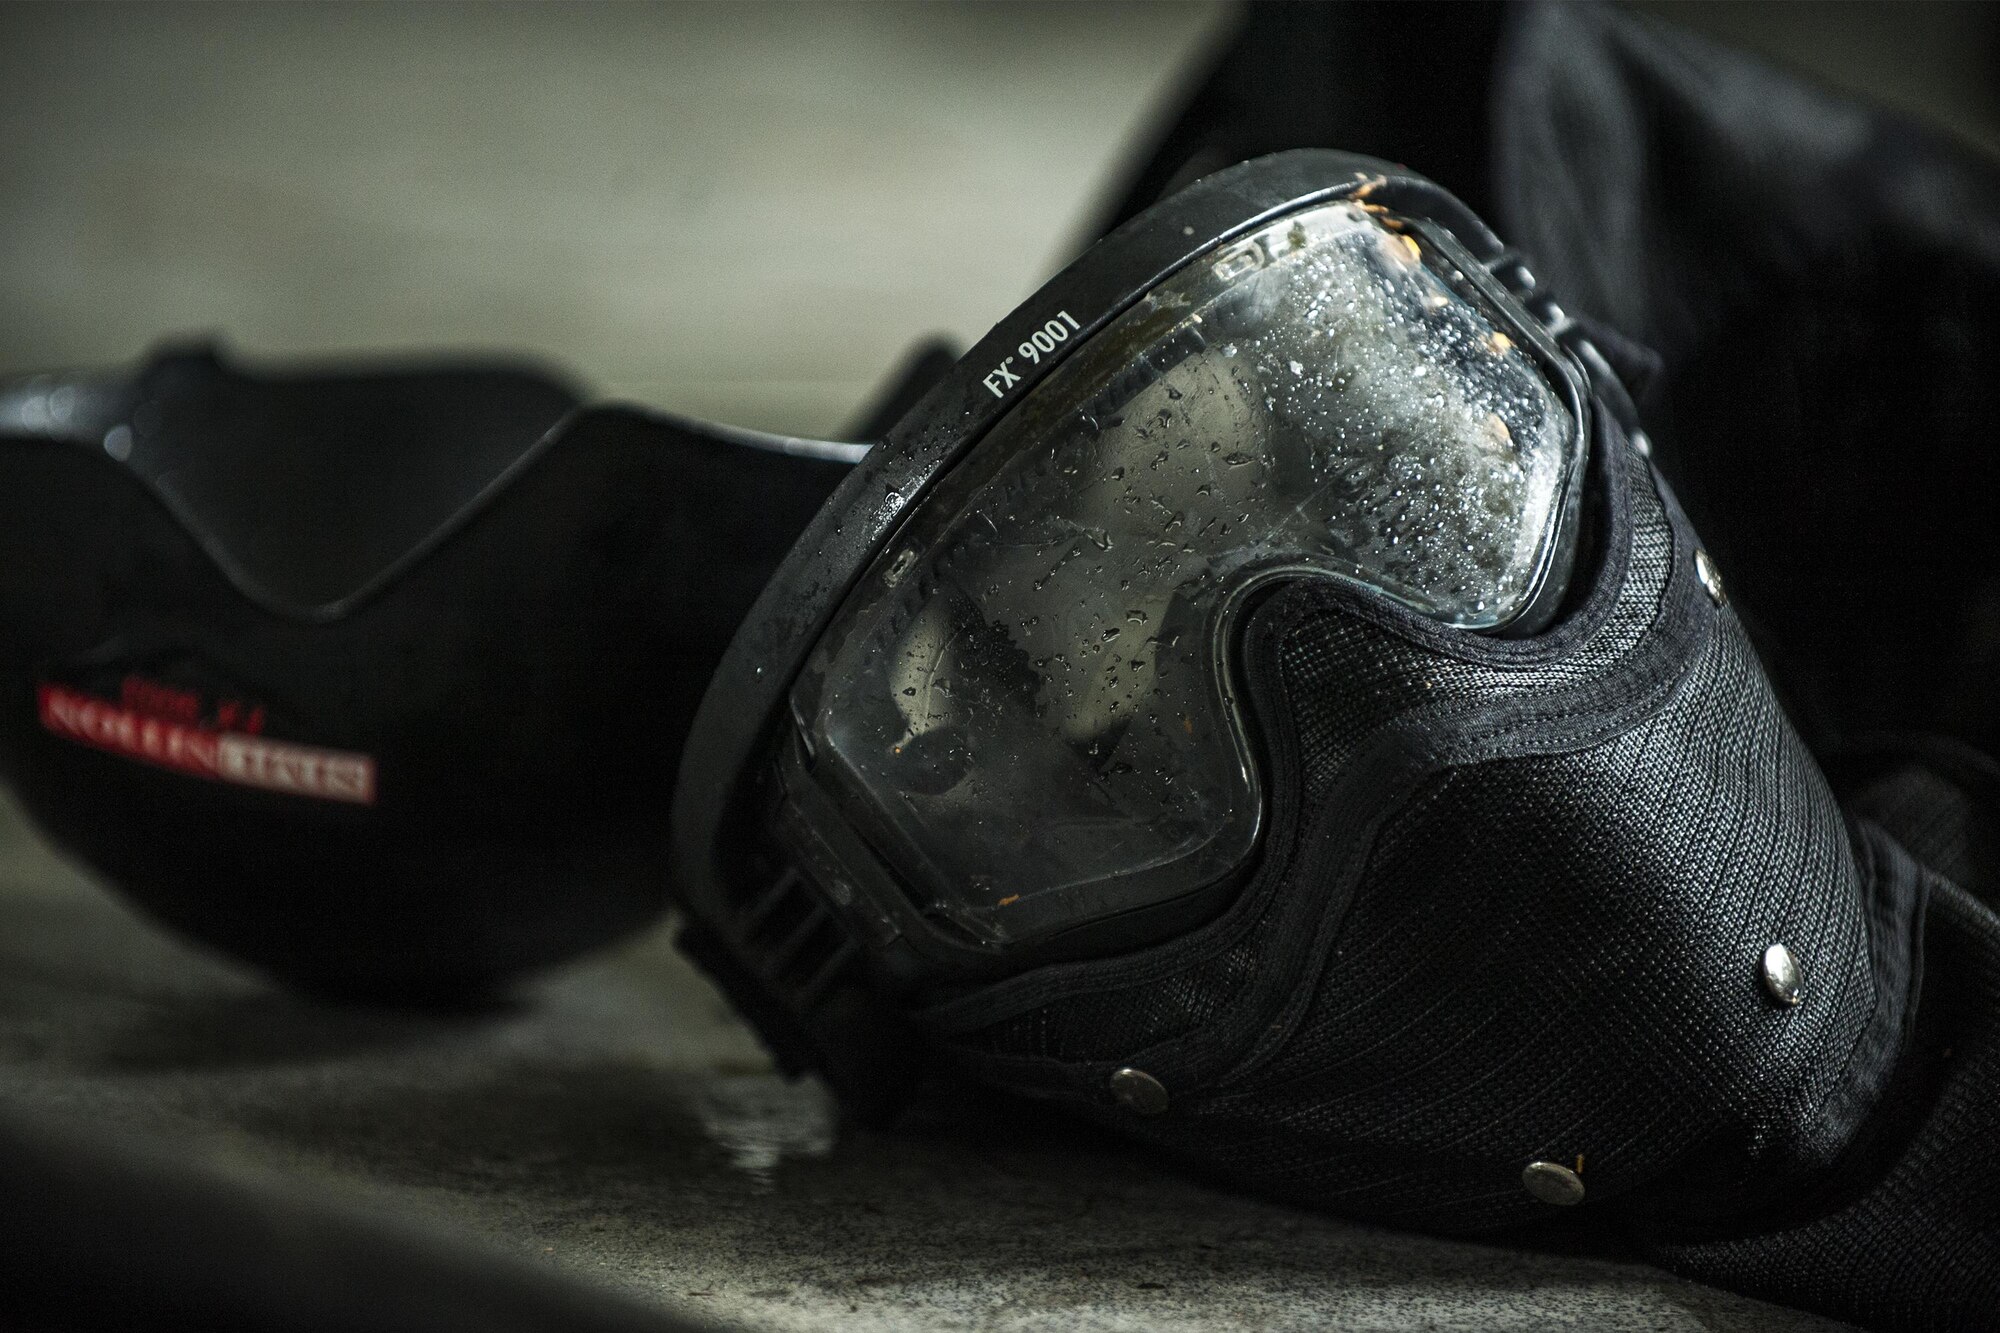 A protective mask rests on a table during combat survival training, Sept. 13, 2016, at Moody Air Force Base, Ga.  As a part of the training, aircrew members fended off teams of opposing forces to test their survival, evasion, resistance and escape skills in an isolated environment. (U.S. Air Force photo by Airman 1st Class Daniel Snider)